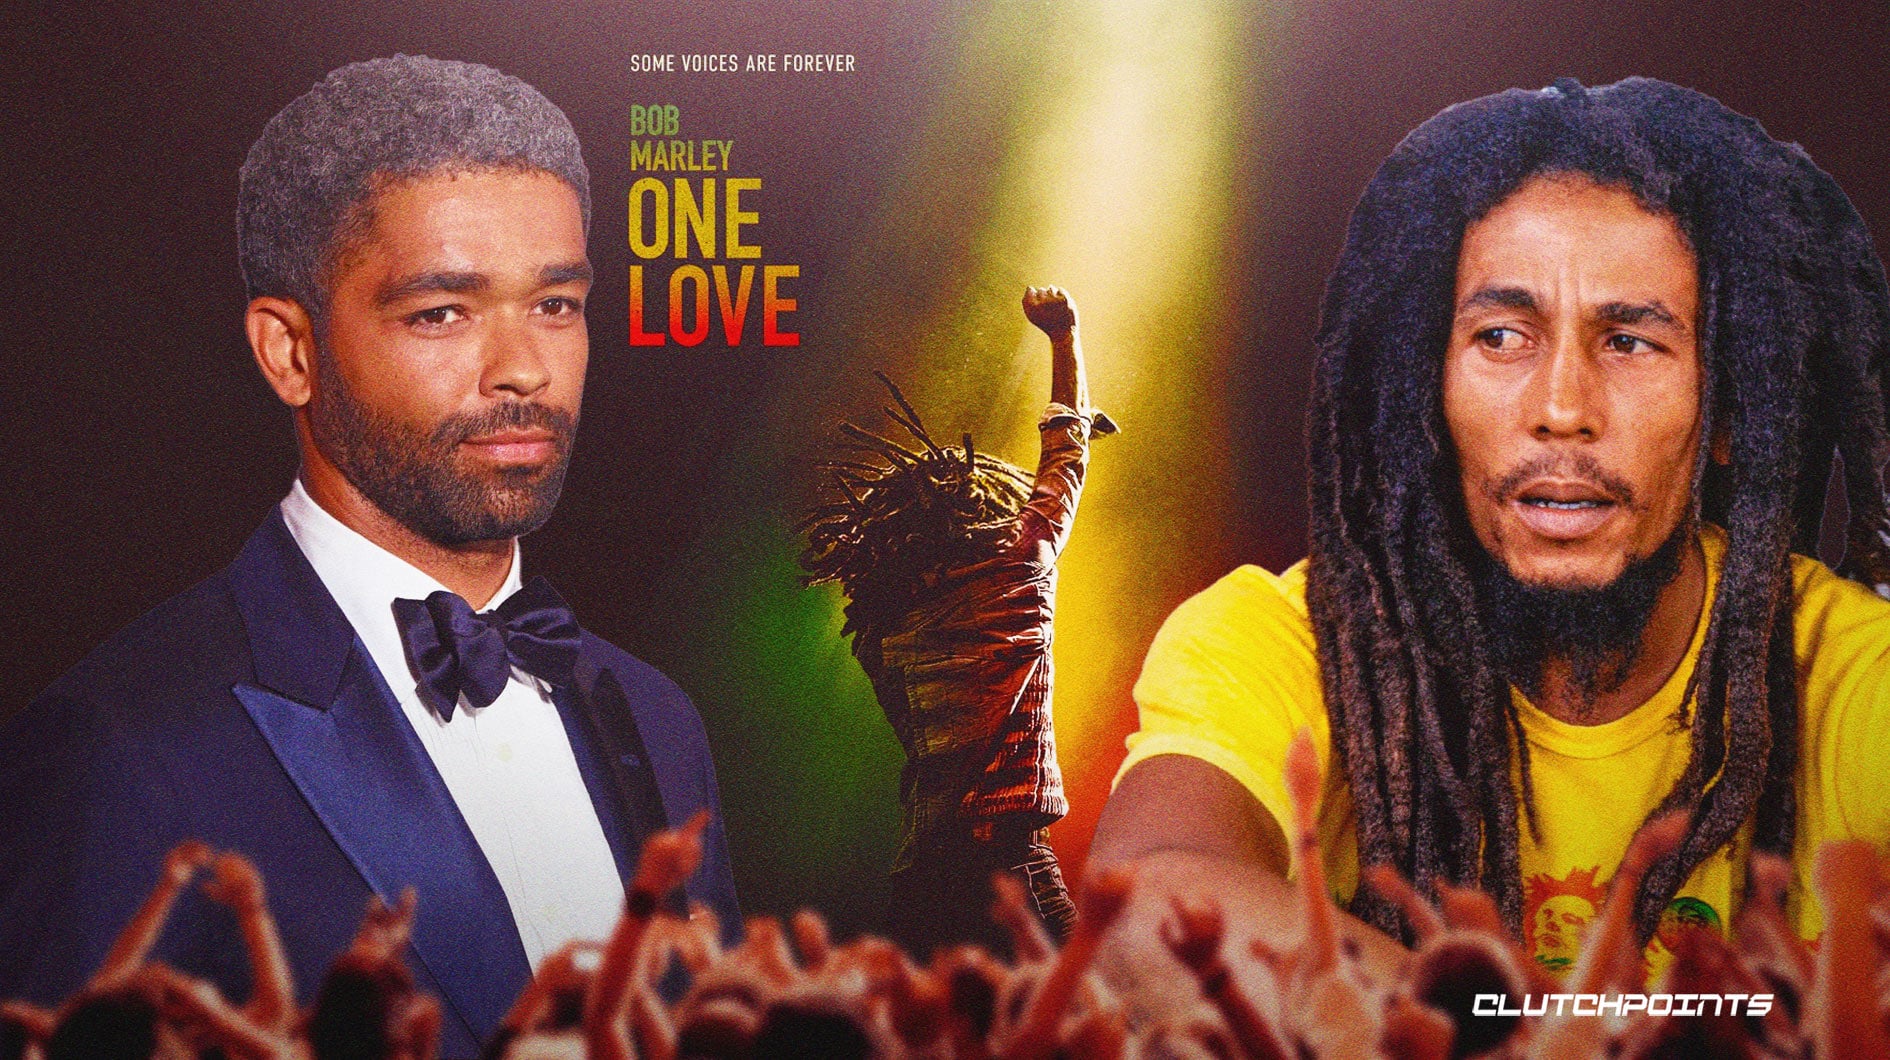 Bob Marley One Love trailer promises every little thing is gonna be